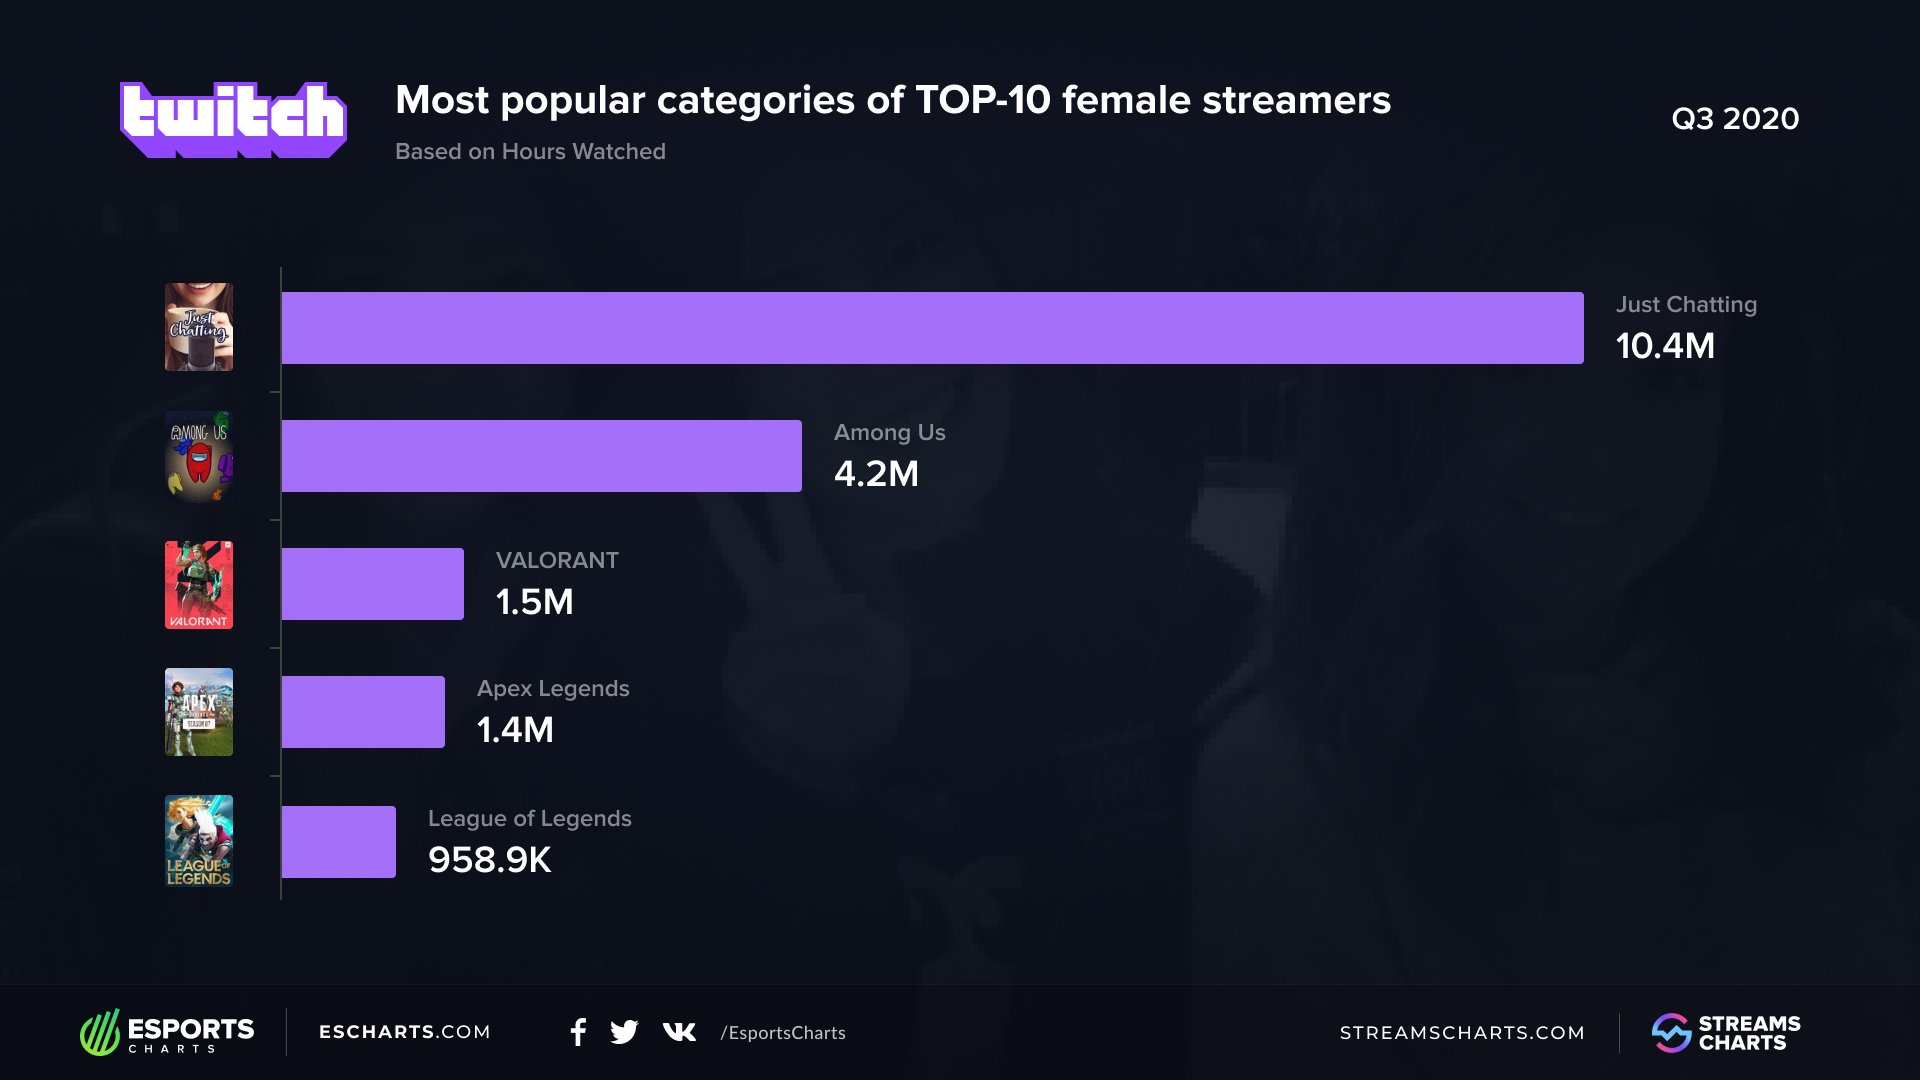 Esports Charts 🇺🇦 on Twitter: "The most popular @twitch categories leading female streamers on the platform in Q3, 2020. Want to know who is the #1 among girls on Twitch? Check